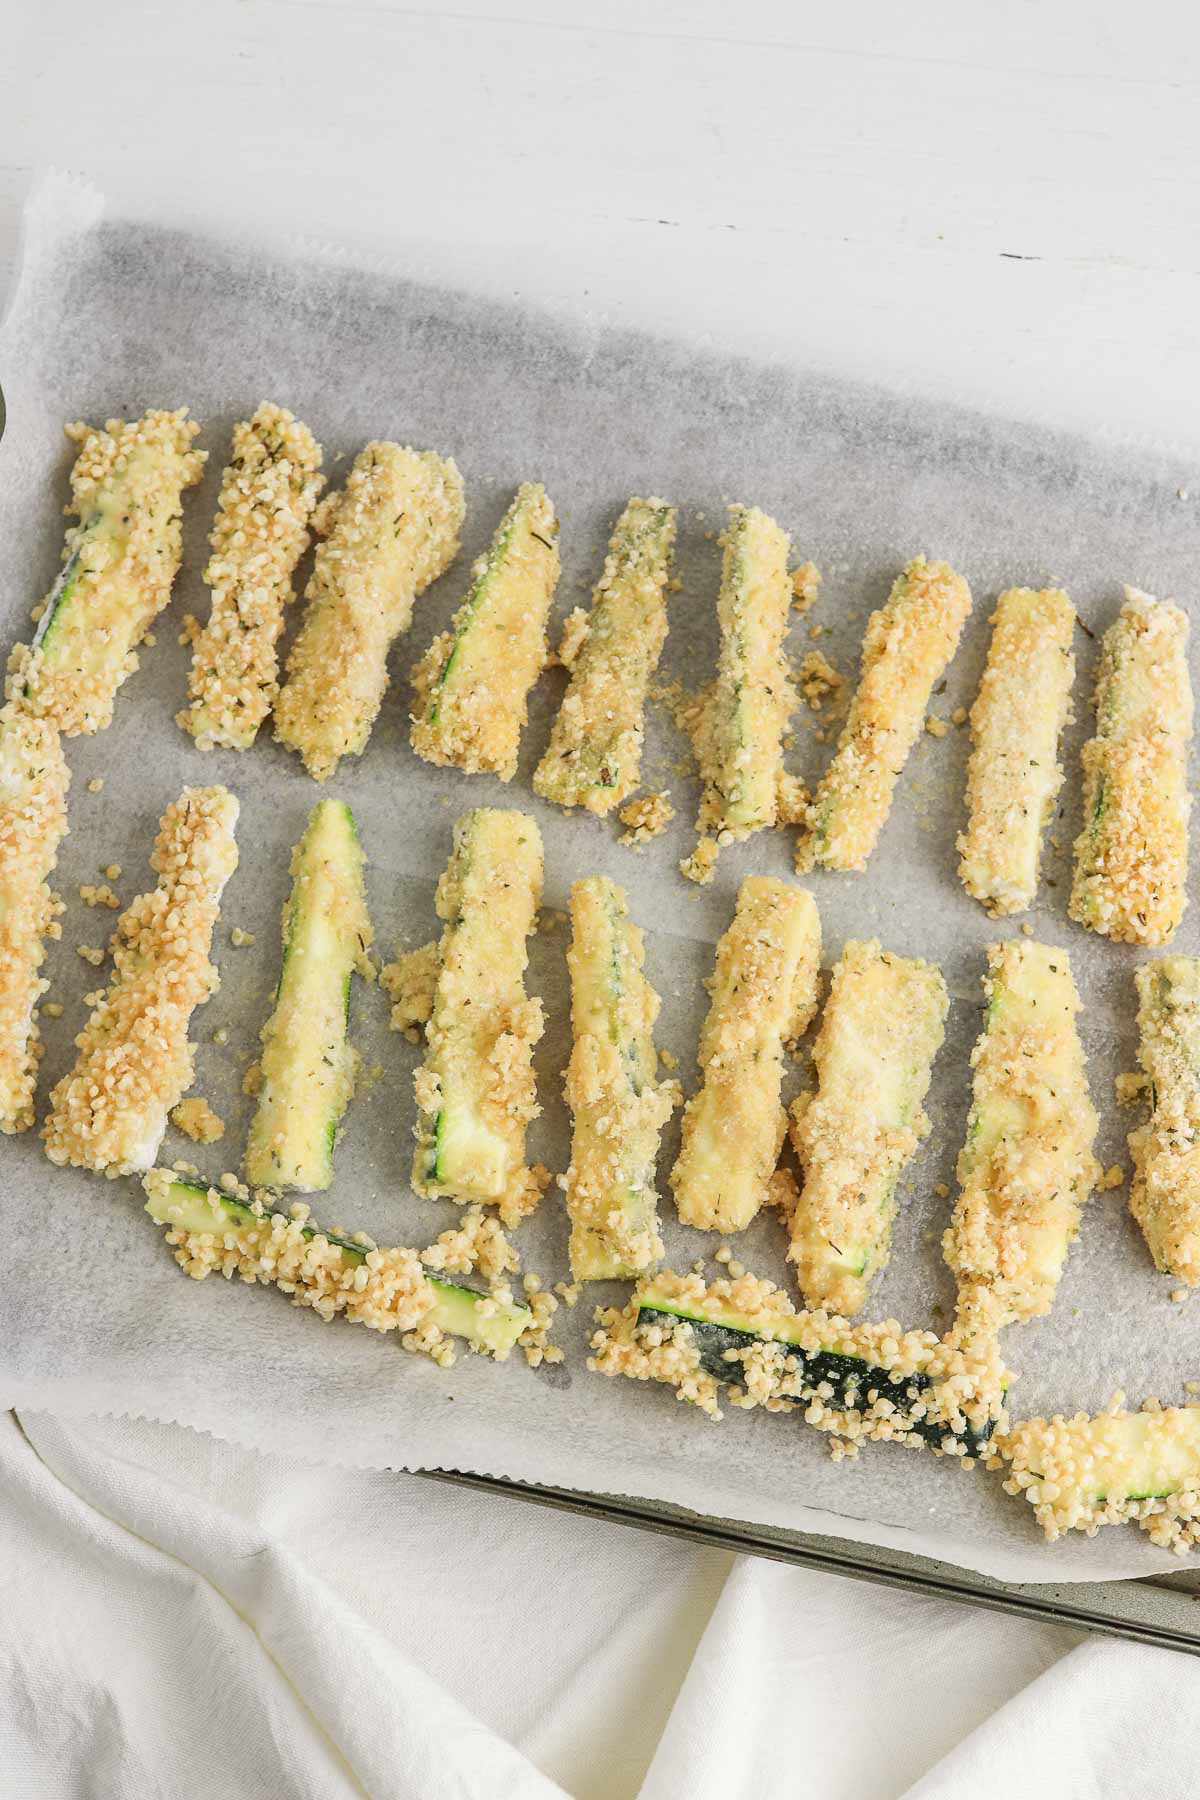 Zucchini strips coated in breading mixture laid out on baking sheet.